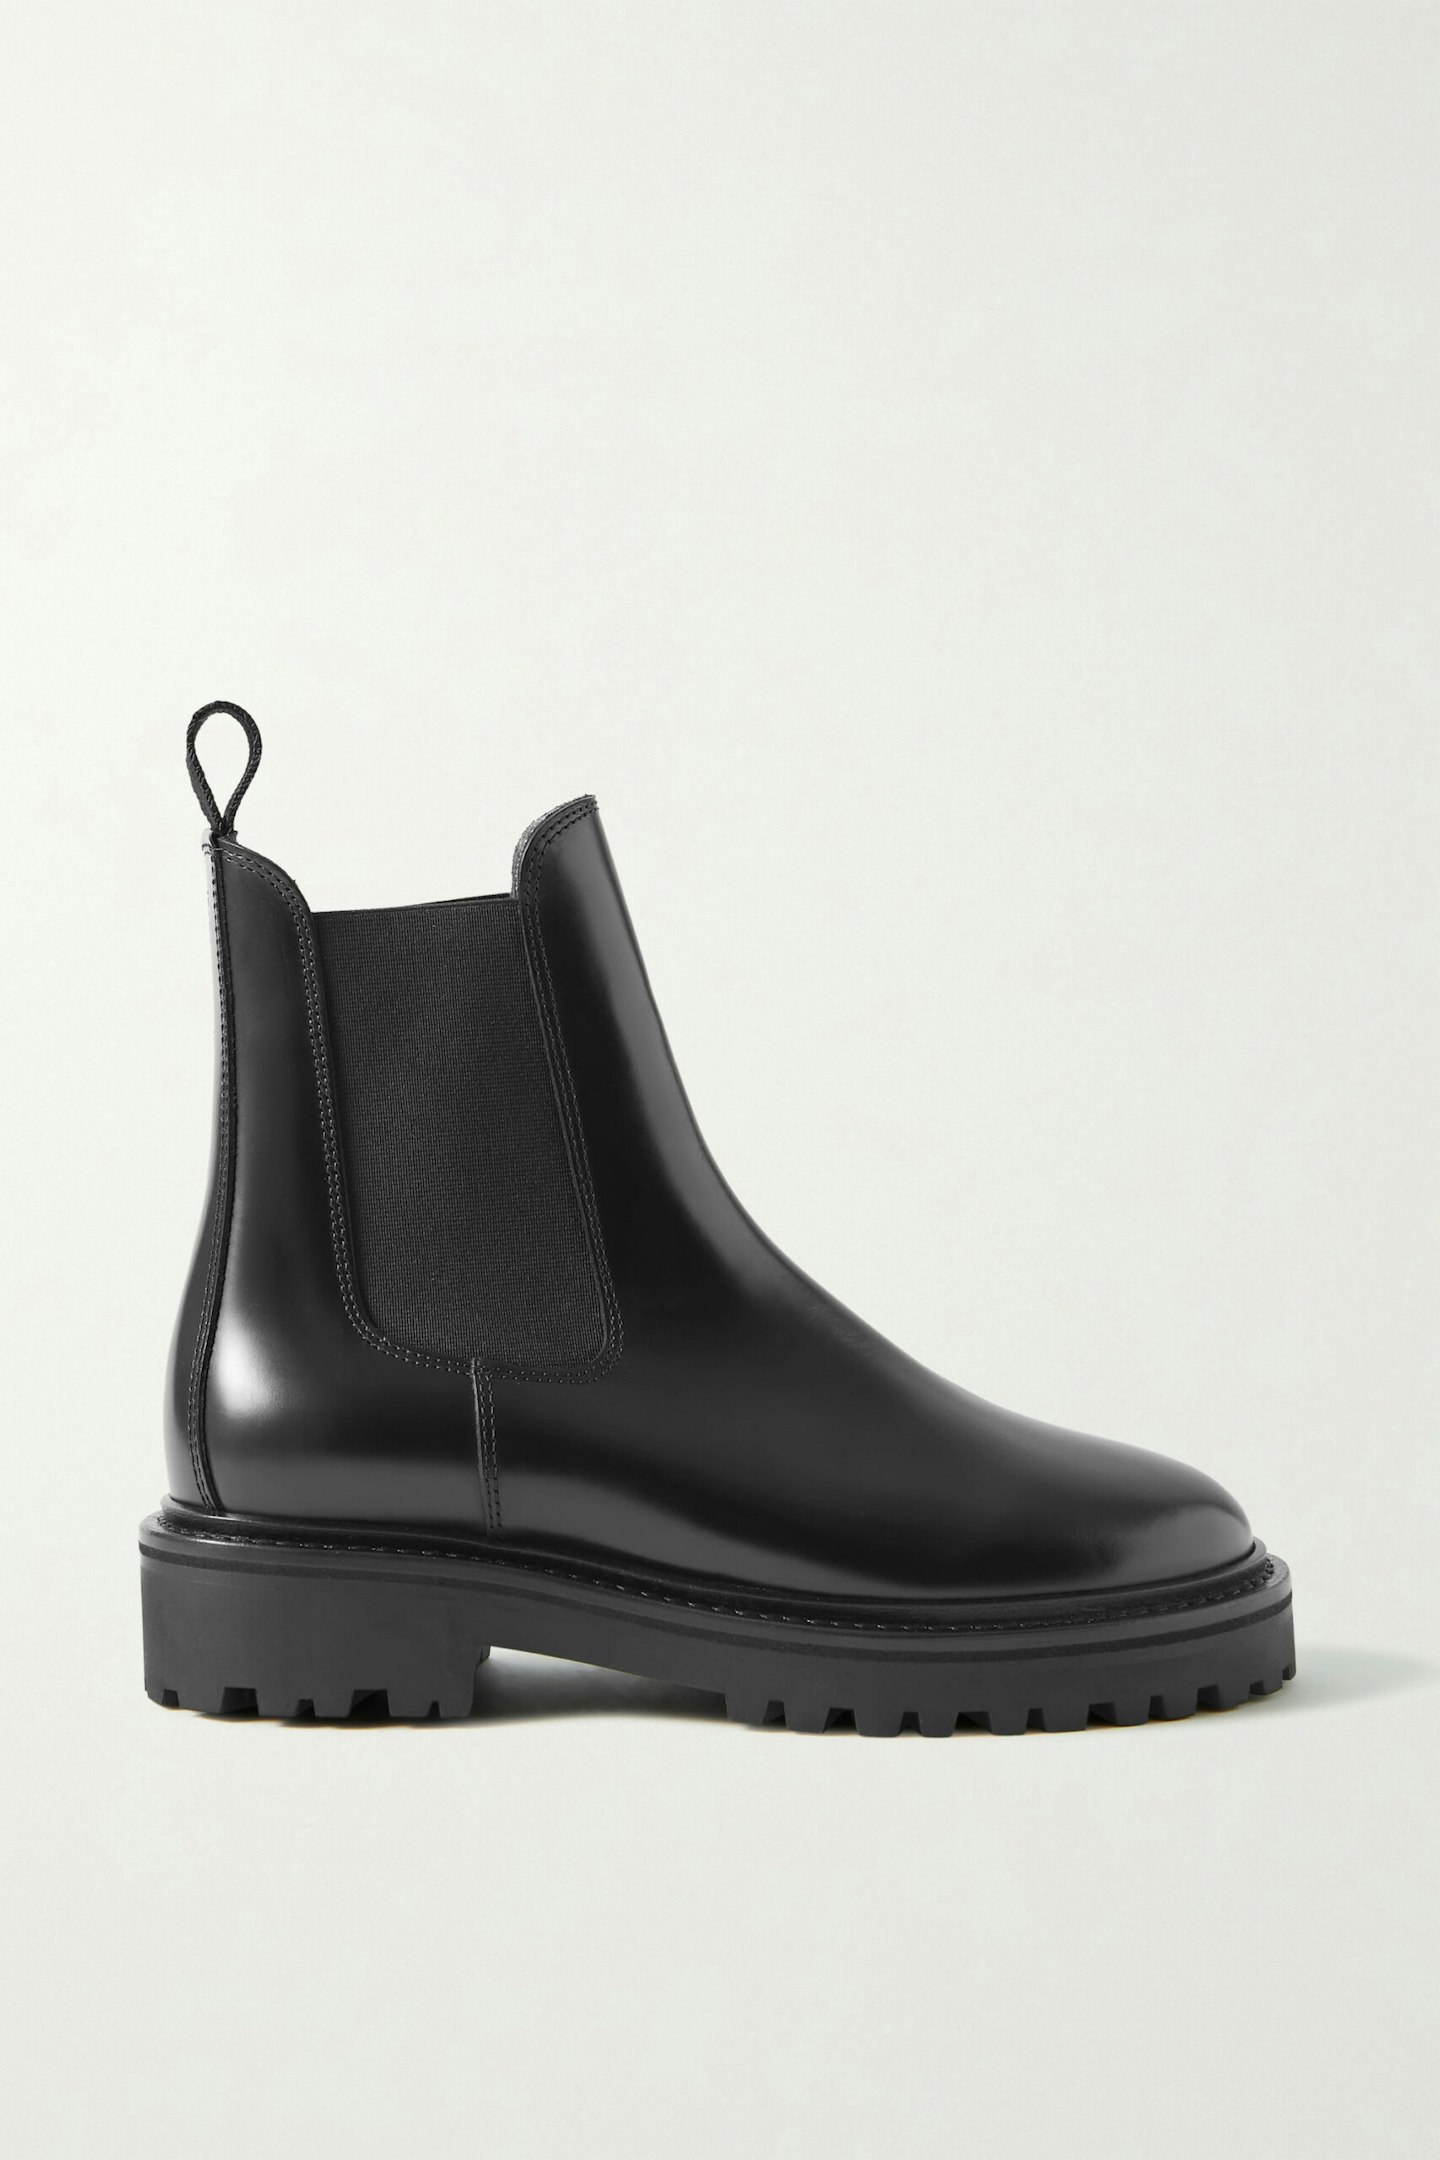 Isabel Marant, Castay Leather Chelsea Boots